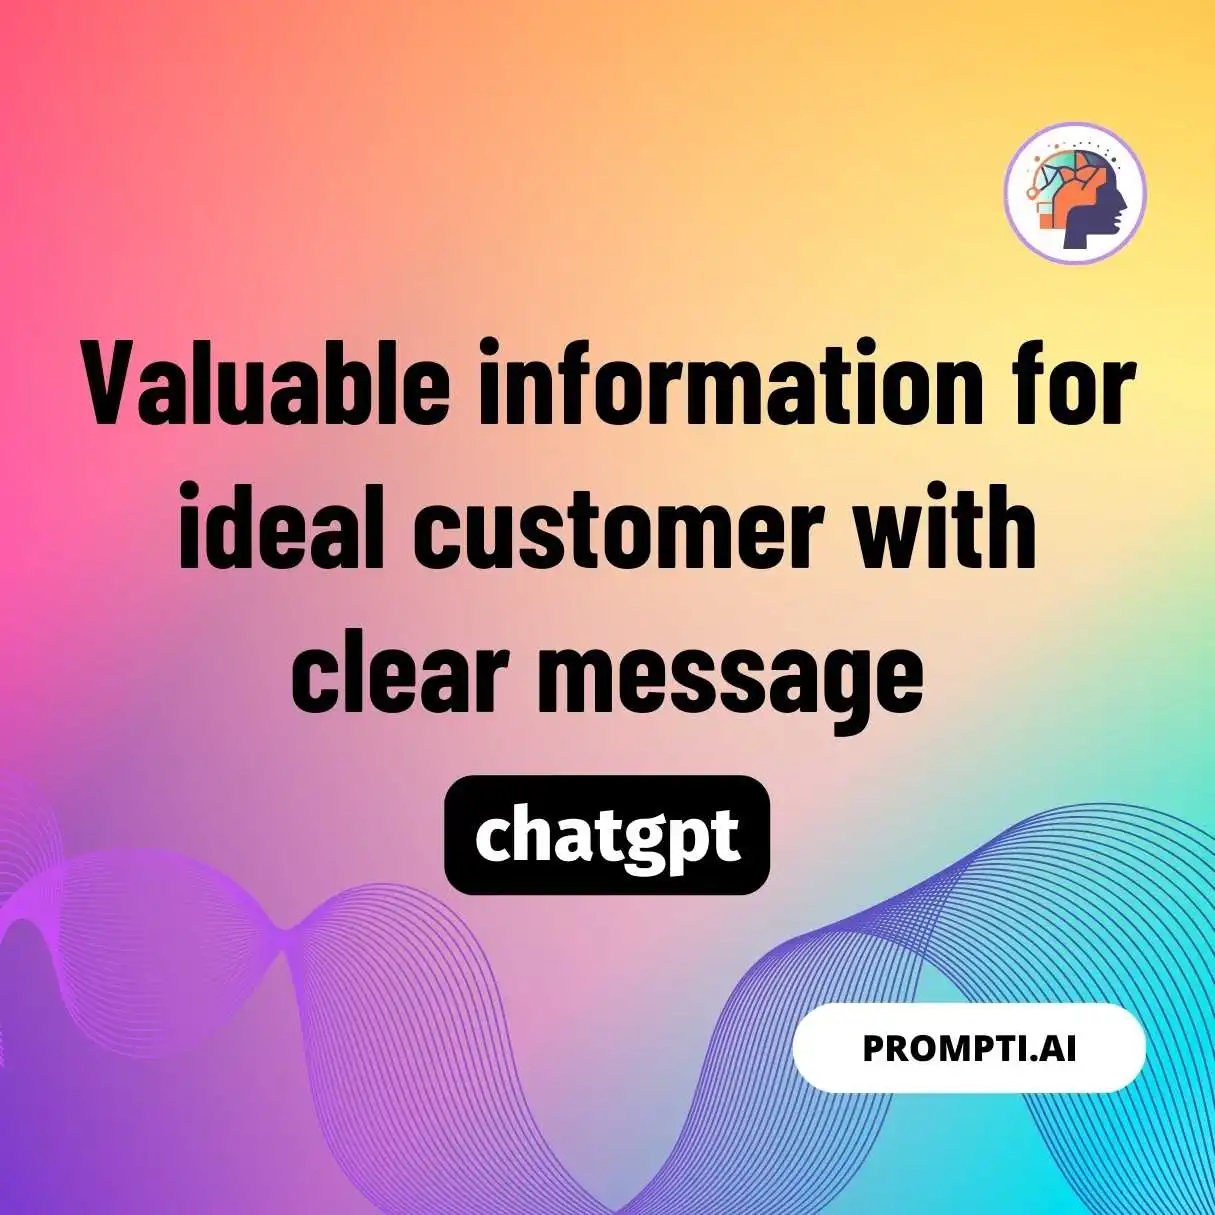 Valuable information for ideal customer with clear message